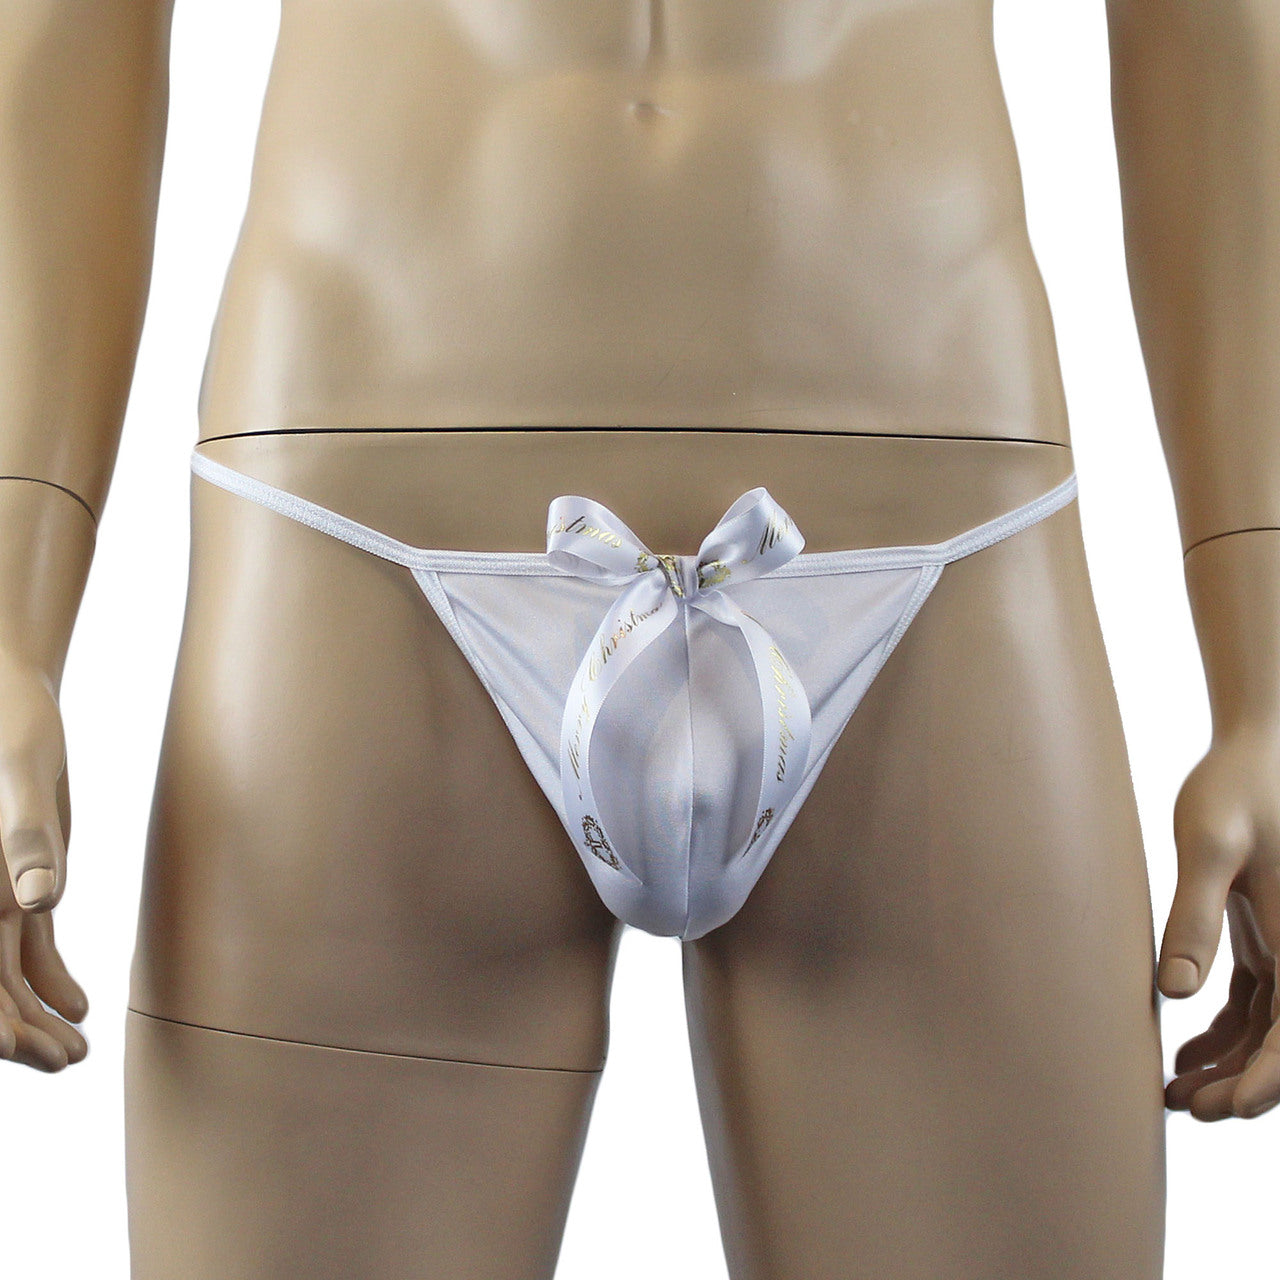 Mens Stretch Spandex Pouch G string with Merry Christmas Bow White